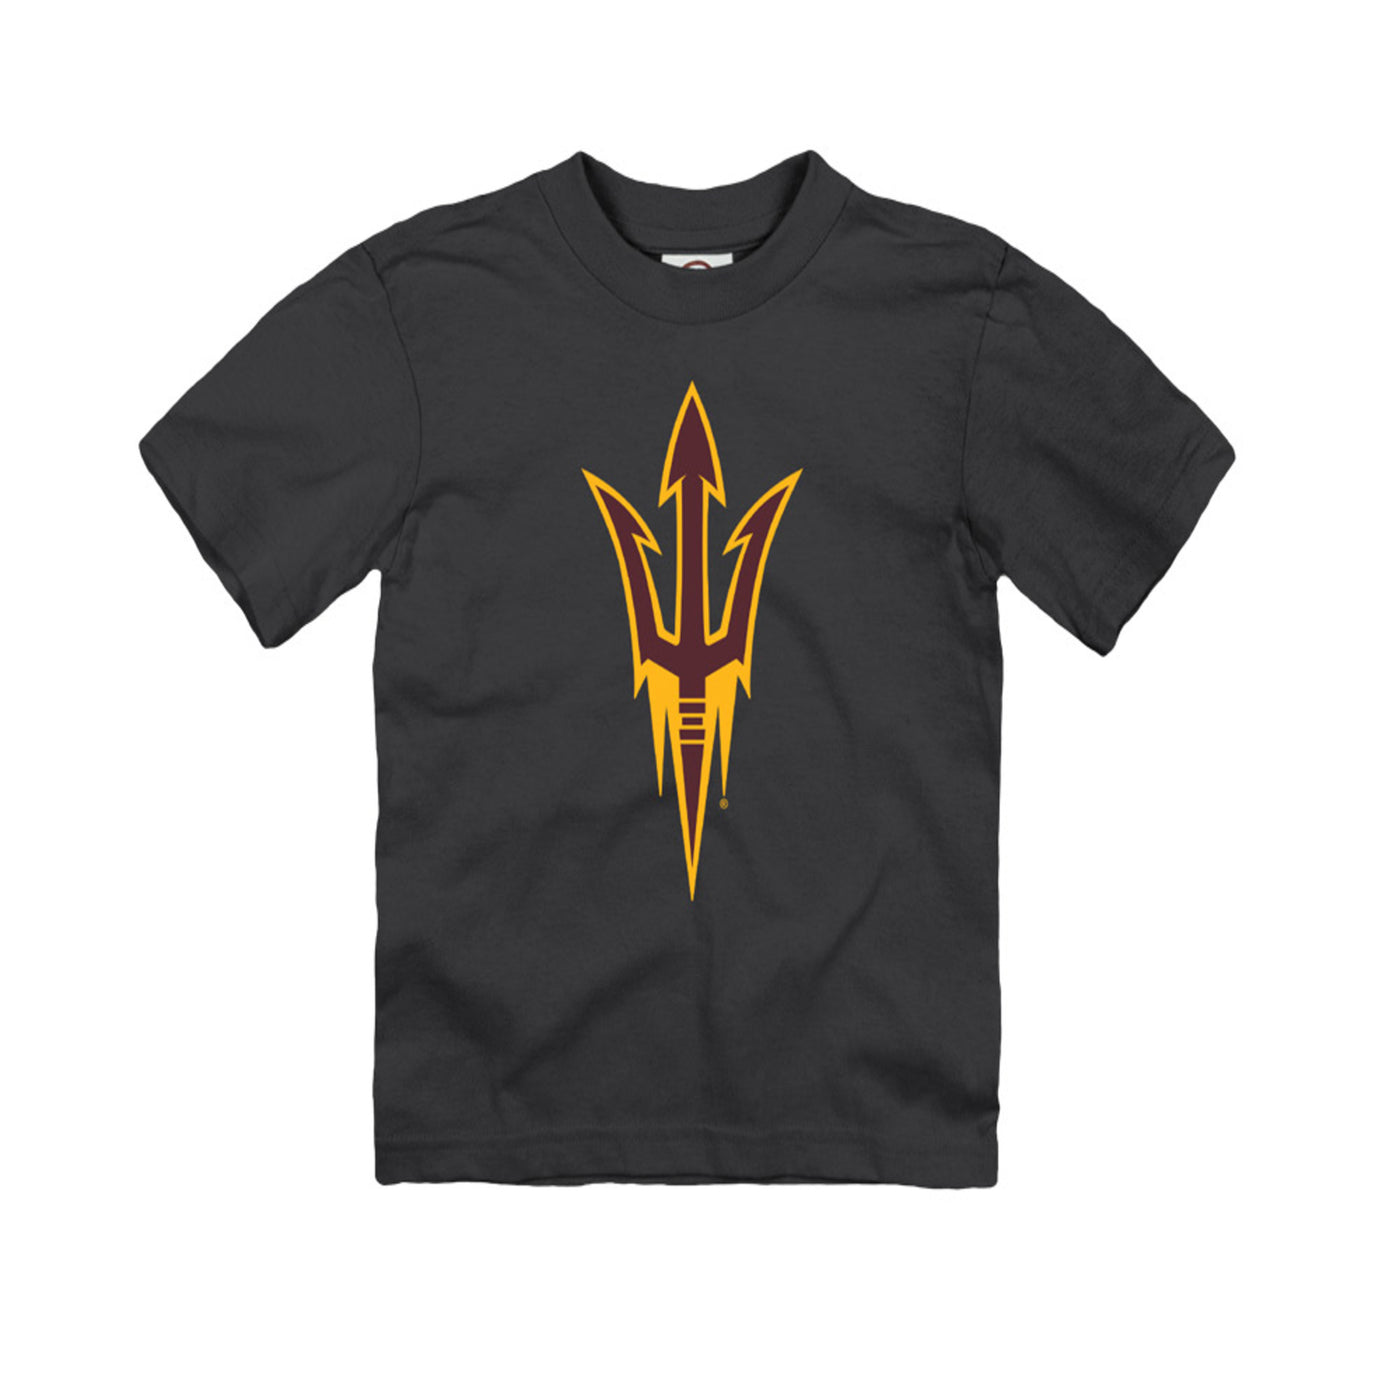 ASU black todler tee with the maroon pitchfork outlined in gold.